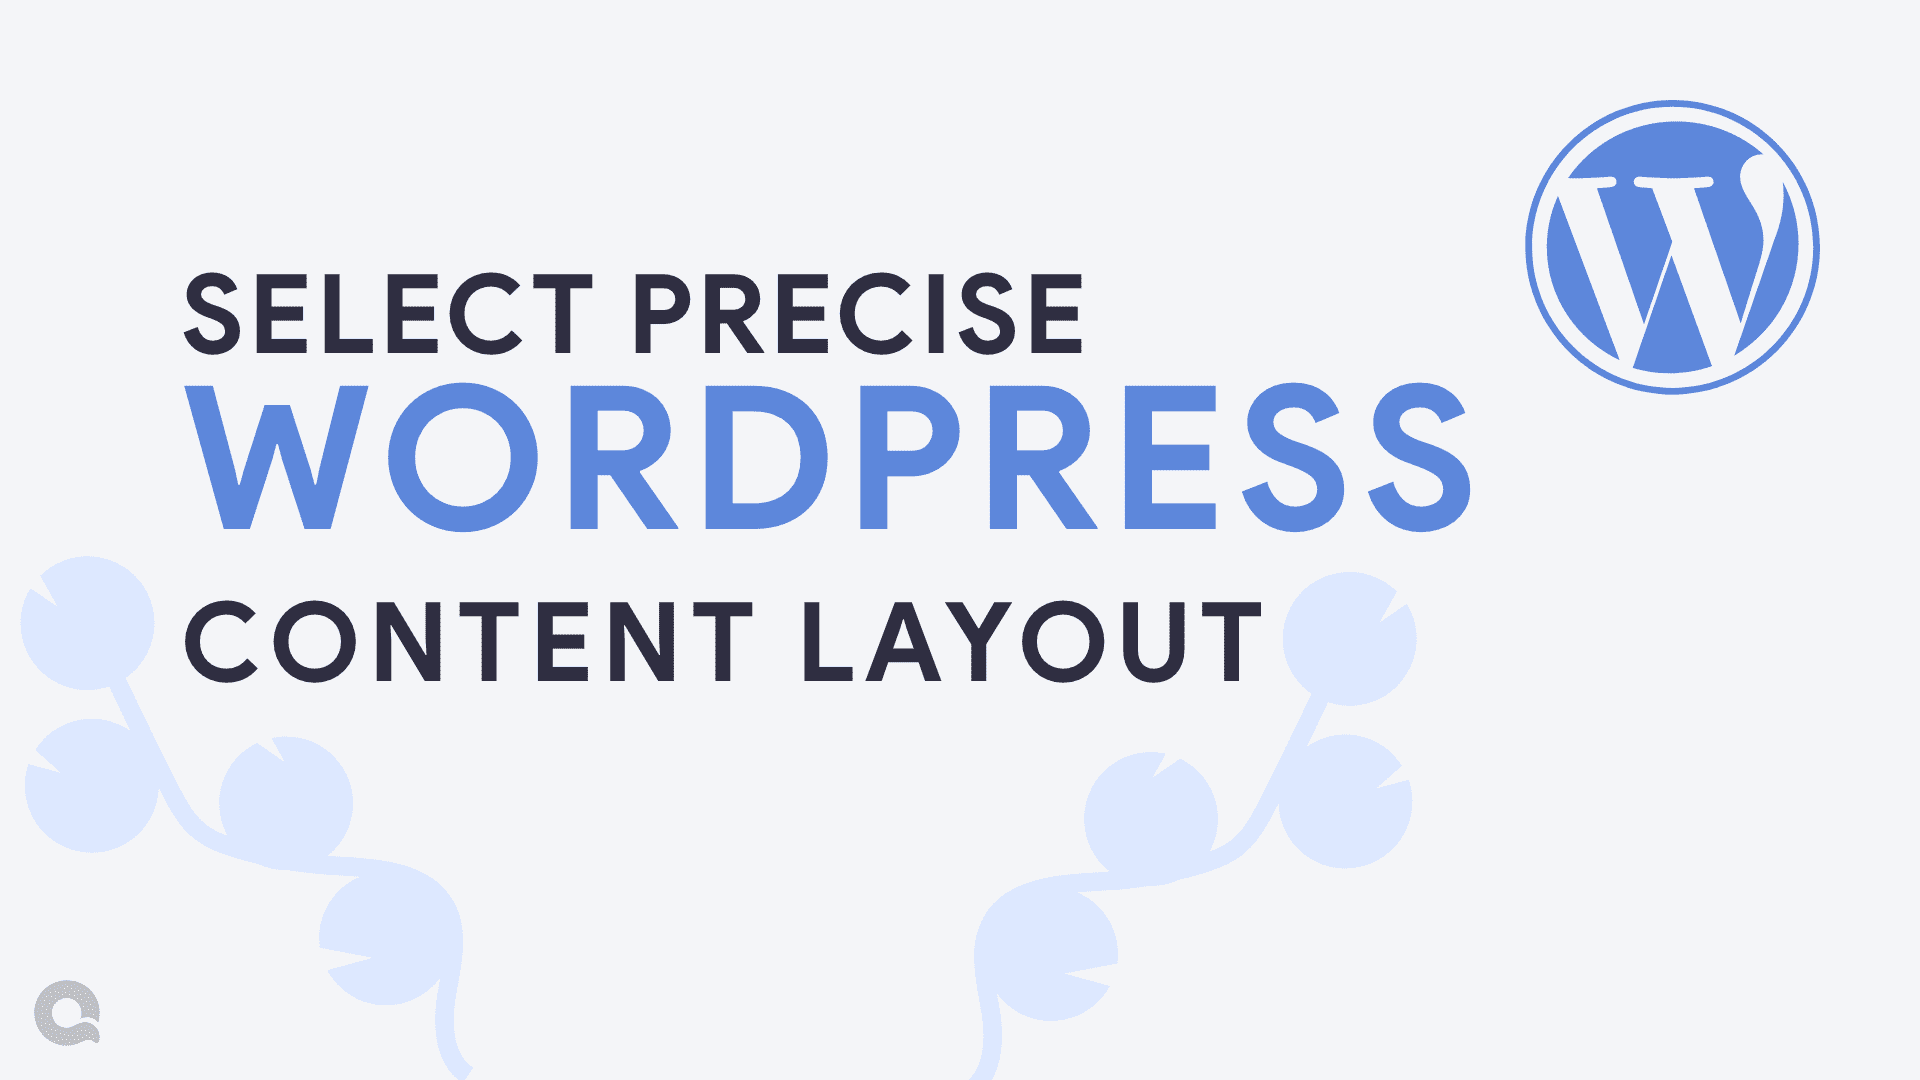 How to Choose a Content Layout for Your WordPress Website Blog